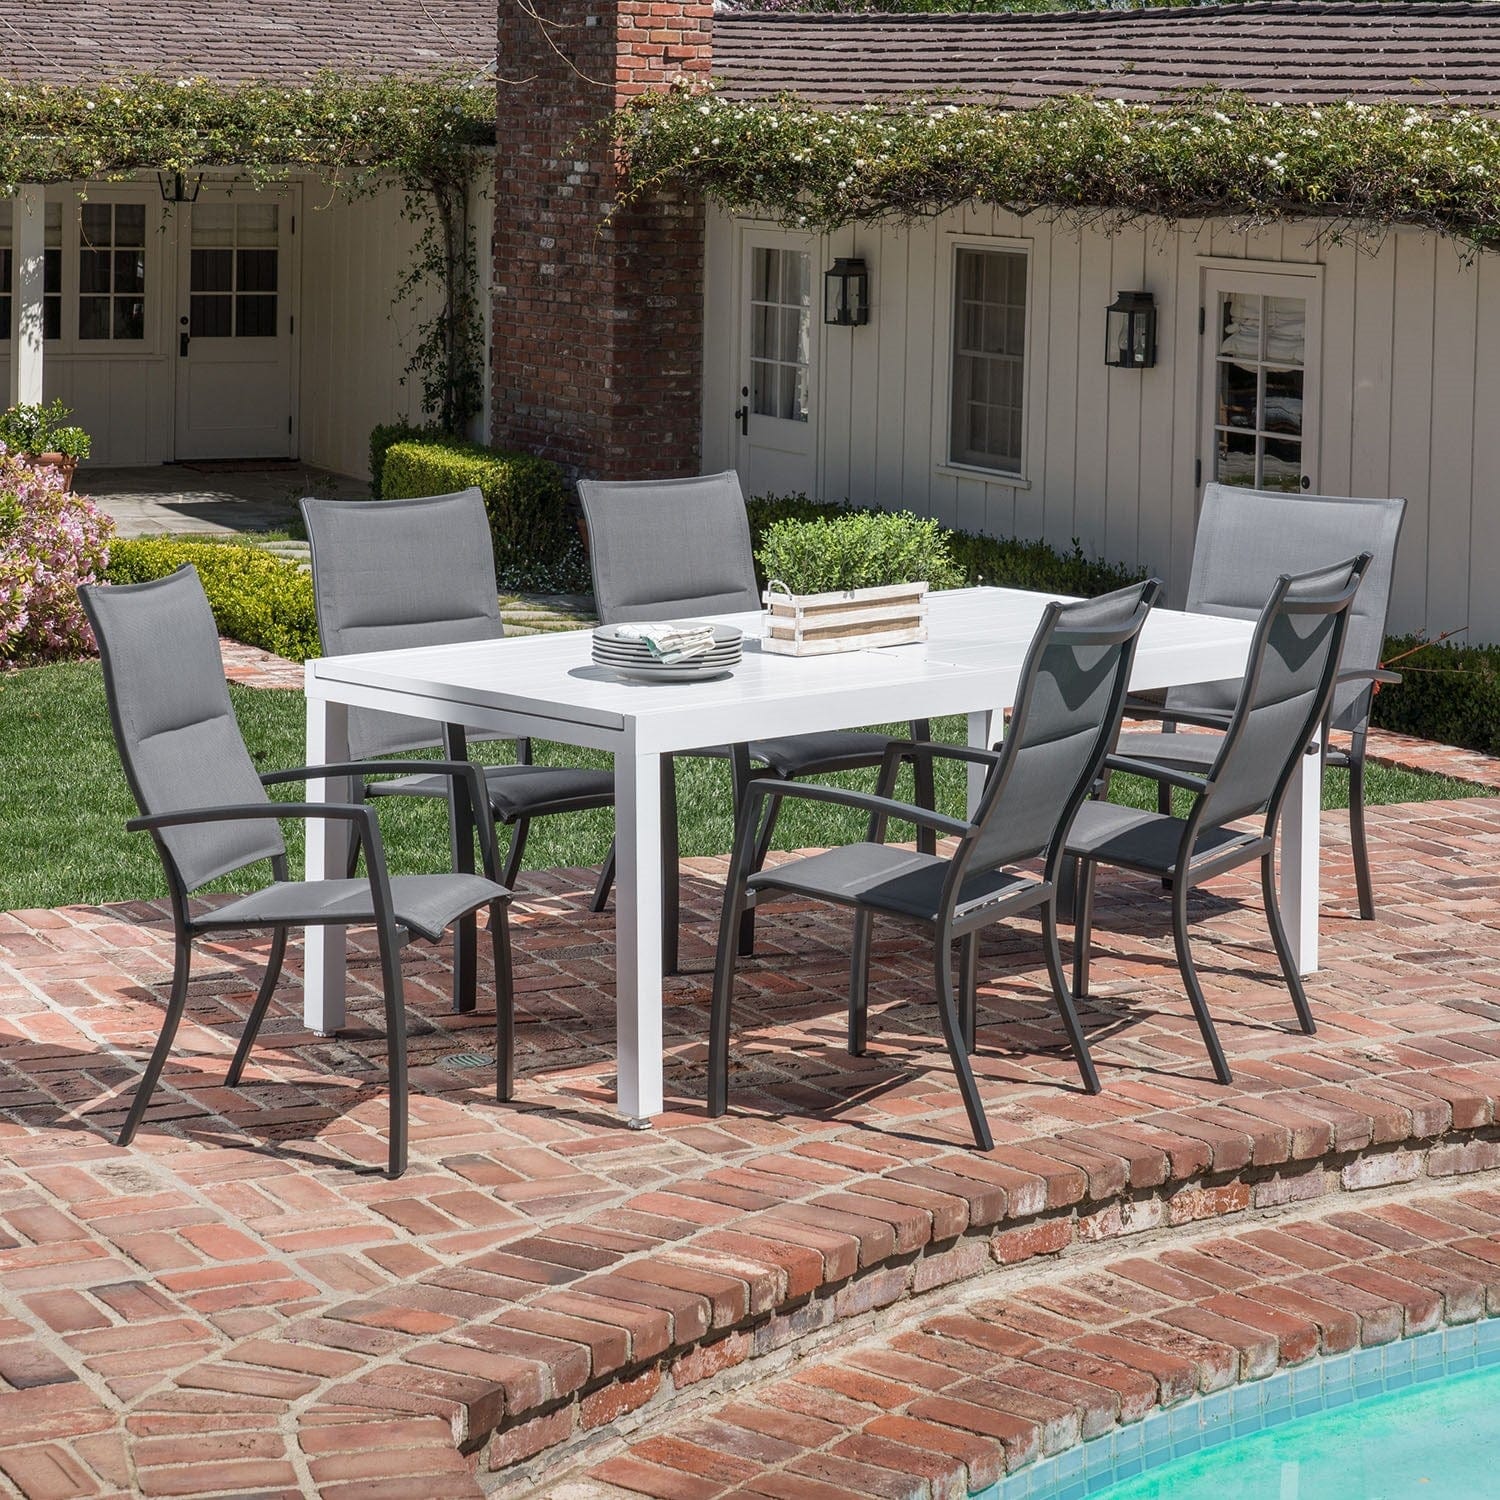 Recreation Outfitters Outdoor Dining Set Hanover Del Mar 7 Piece Outdoor Dining Set with 6 Padded Sling Chairs in Gray and a 40" x 118" Expandable Dining Table | DELDN7PCHB-WG